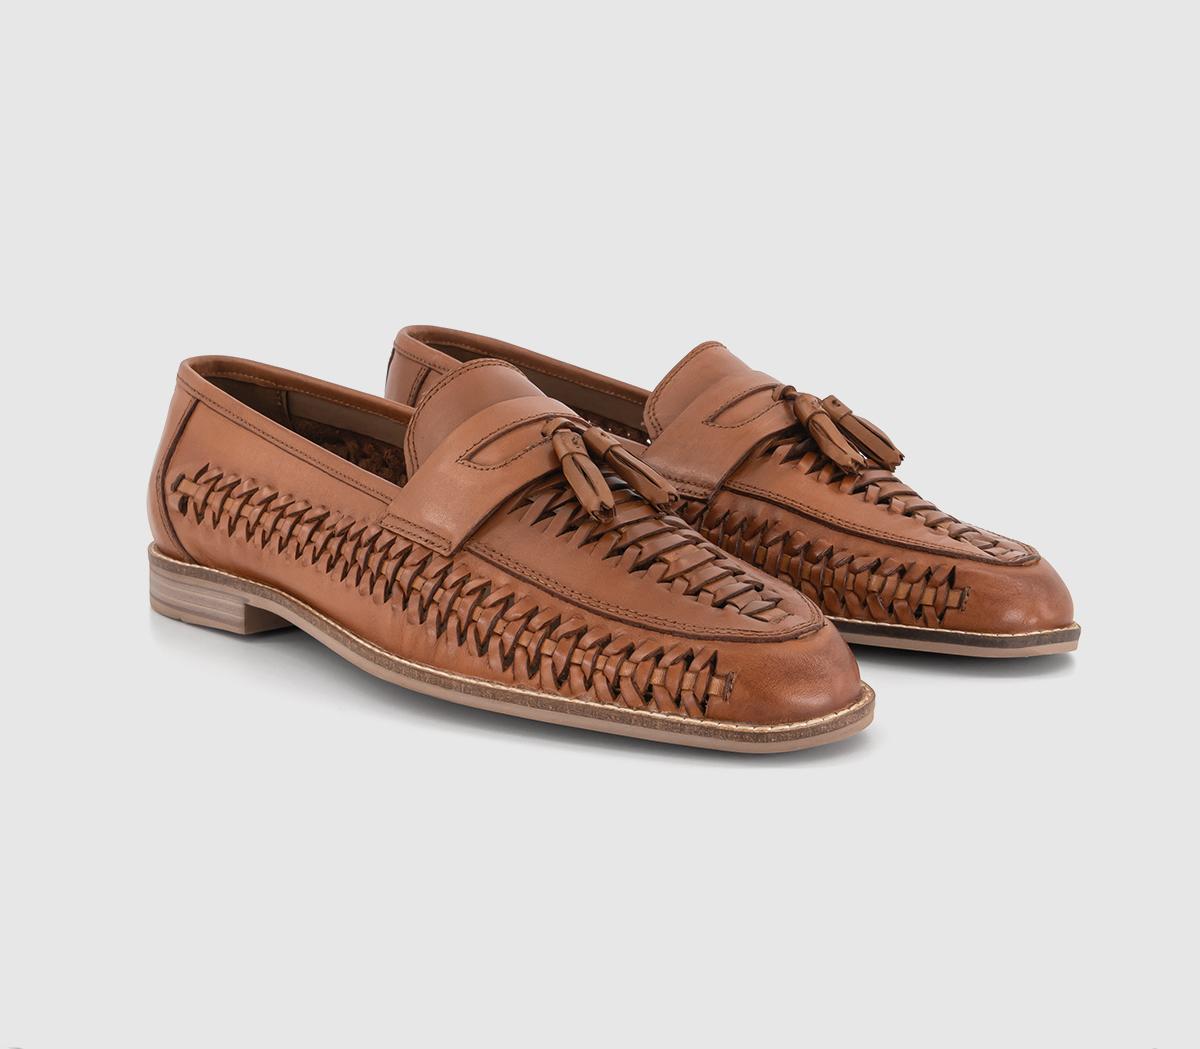 OFFICE Mens Clapham Tassel Woven Loafers Tan Leather, 9